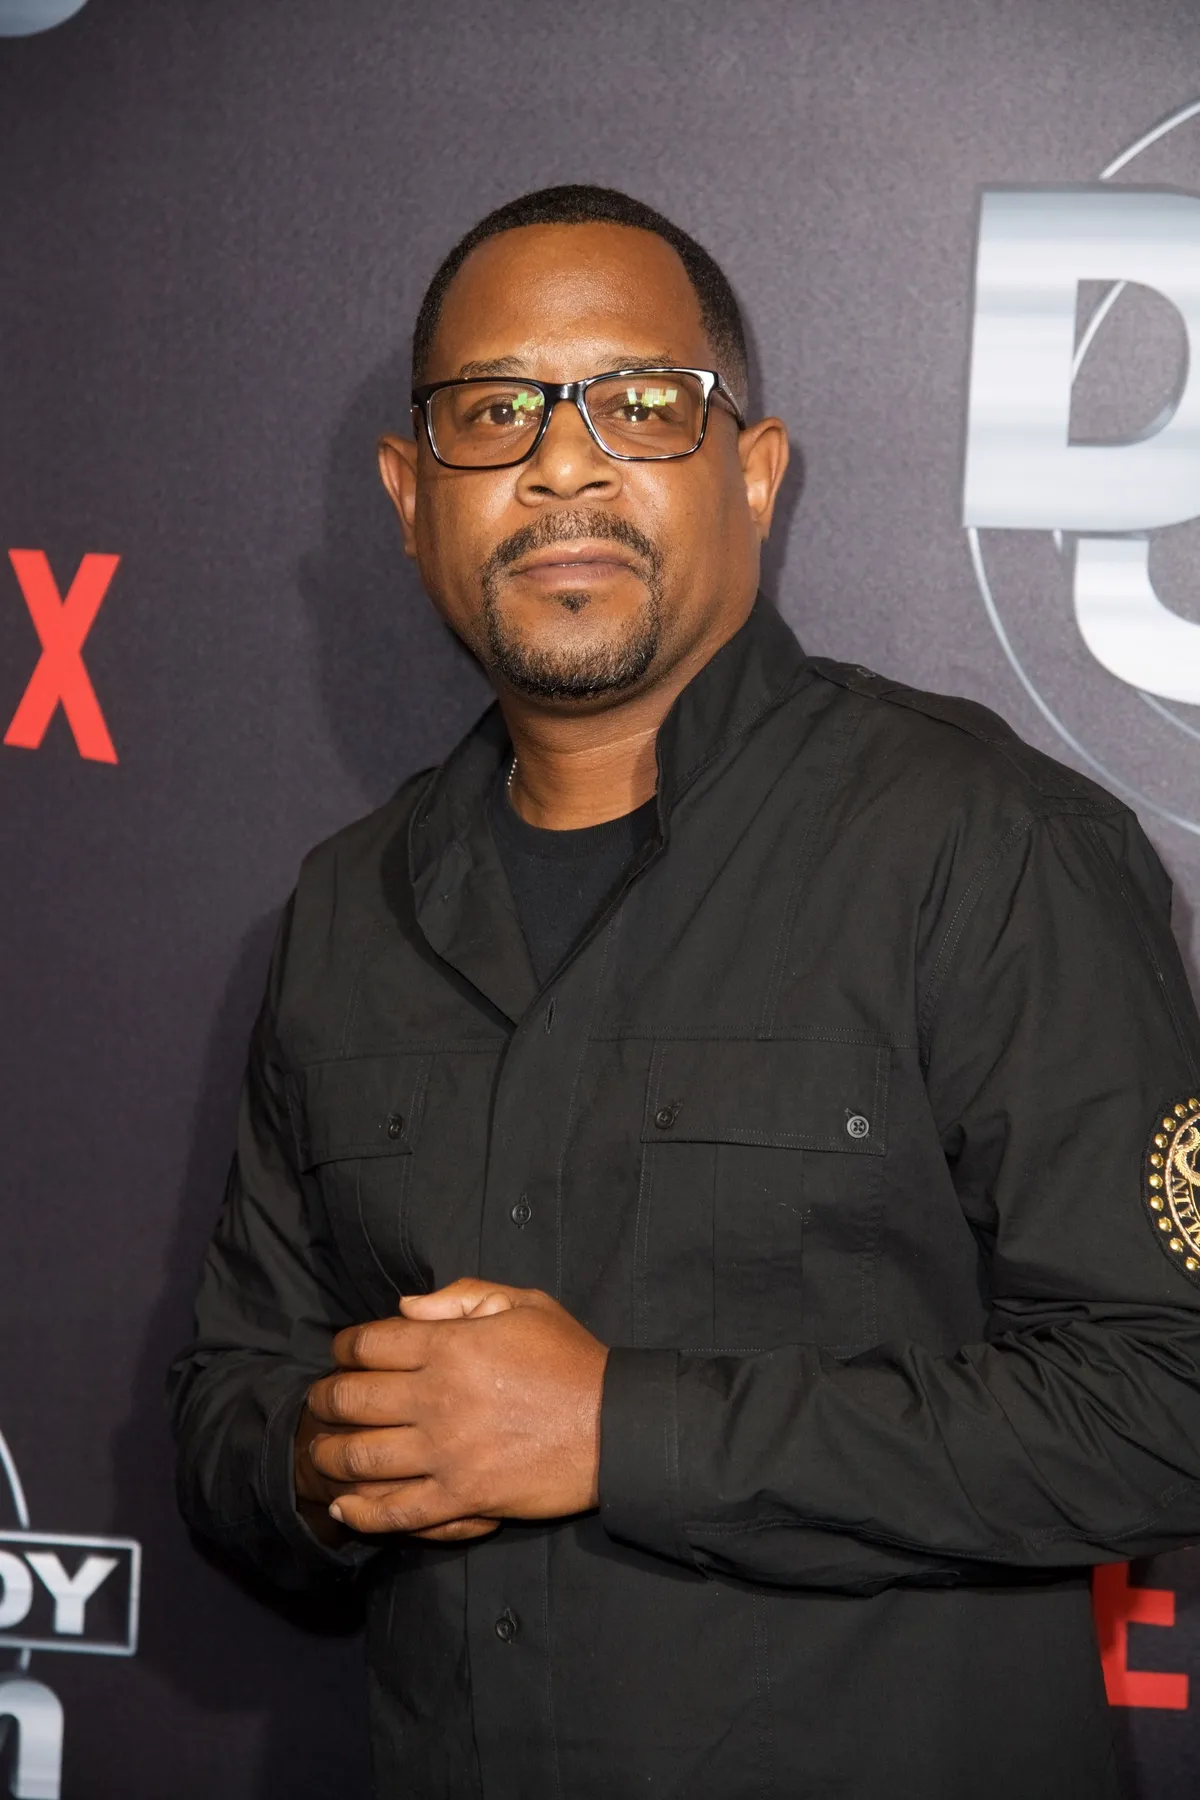 Martin Lawrence at Netflix Presents Russell Simmons "Def Comedy Jam 25" special event at The Beverly Hilton Hotel in September 2017 in Beverly Hills, California. | Photo: Getty Images